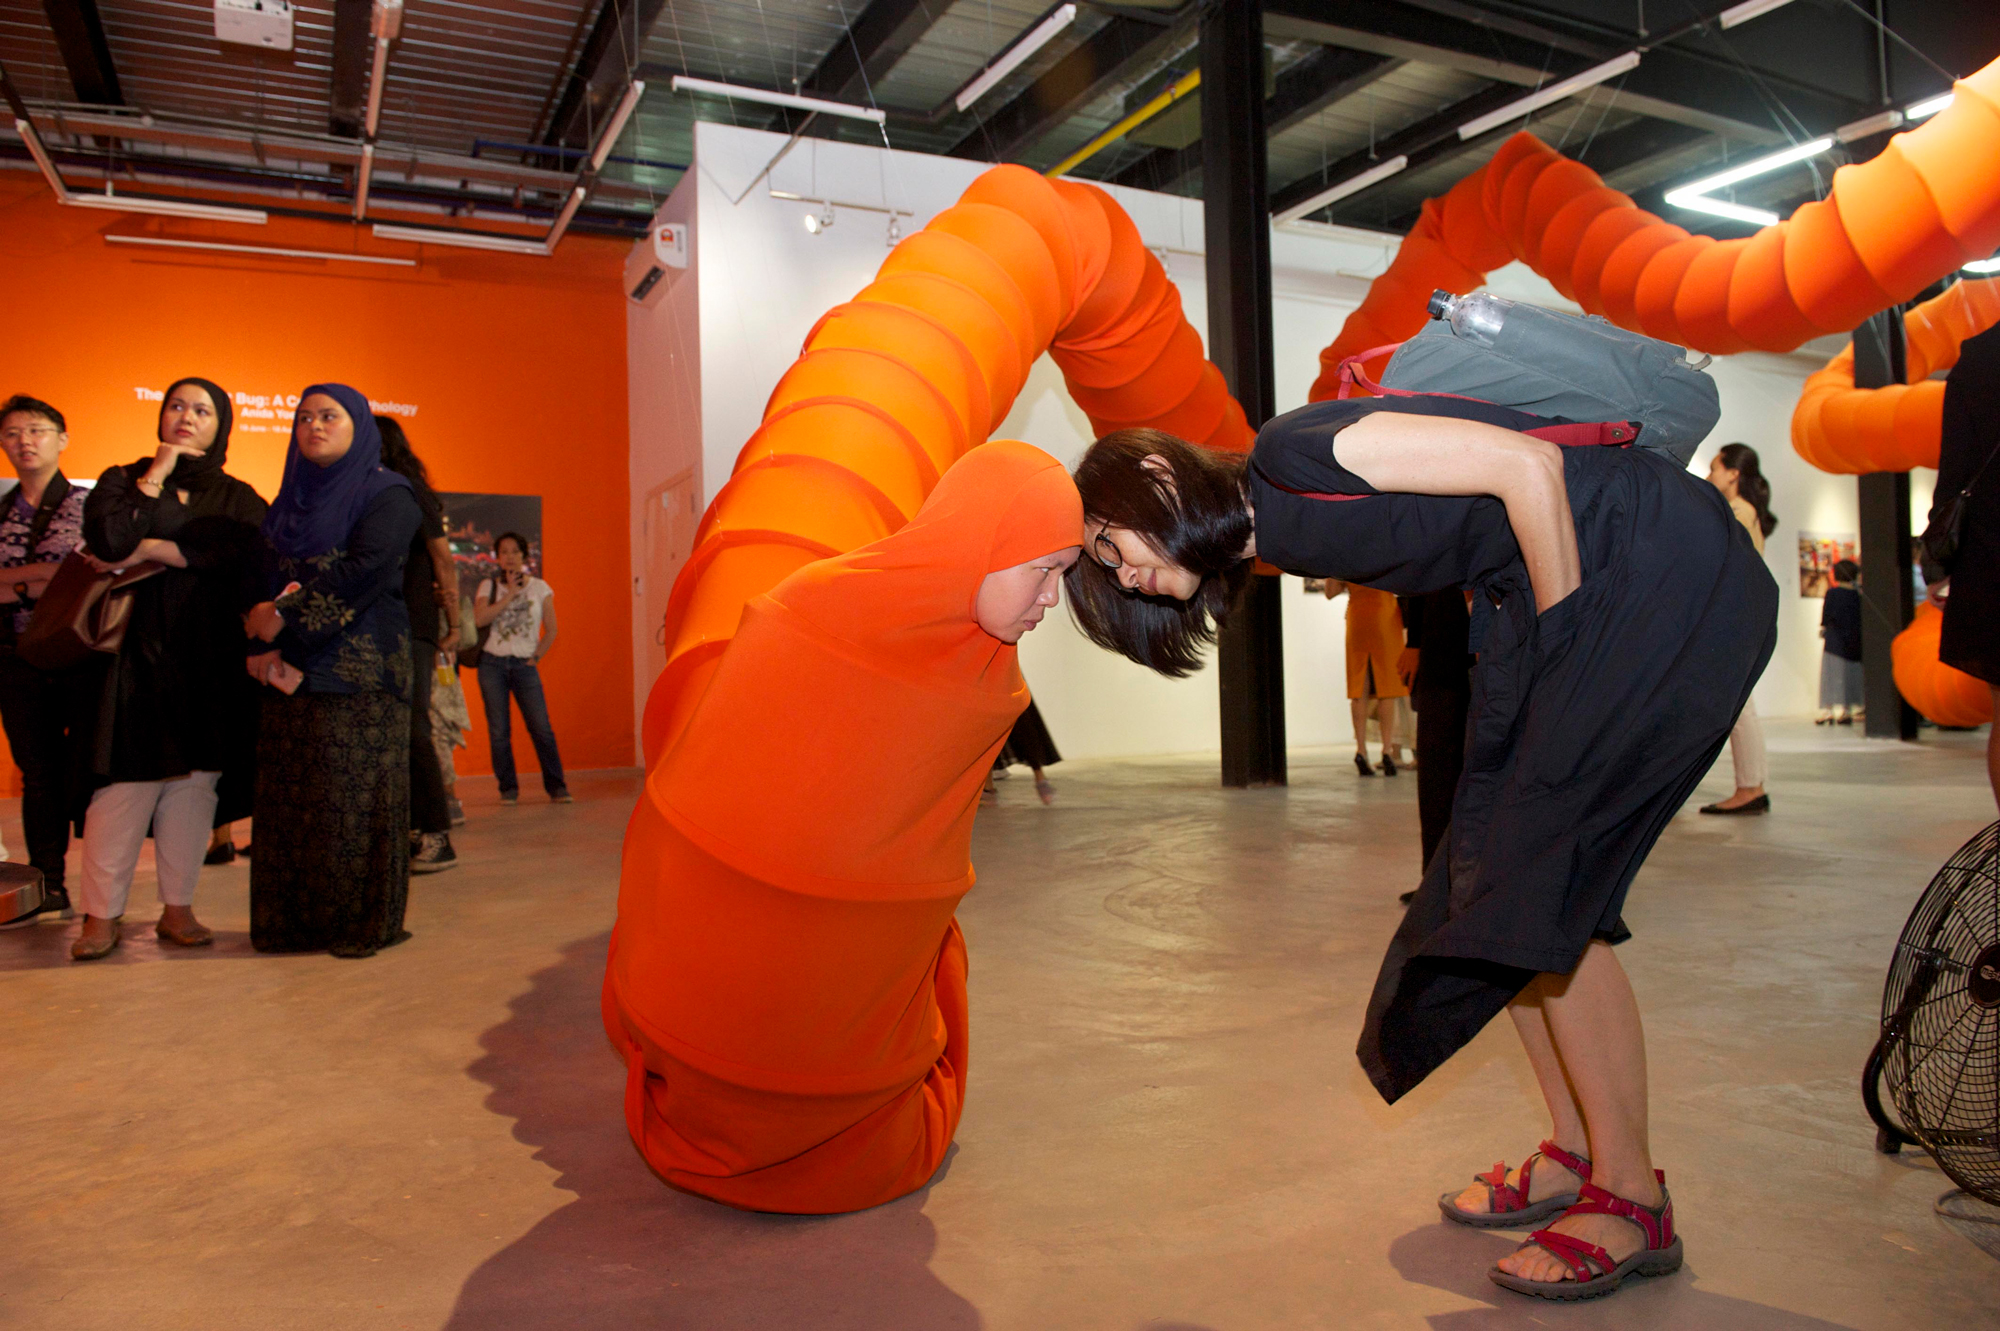 A museum visitor brings her fact close to Anida Ali, who is wearing a giant orange tube that winds around the room